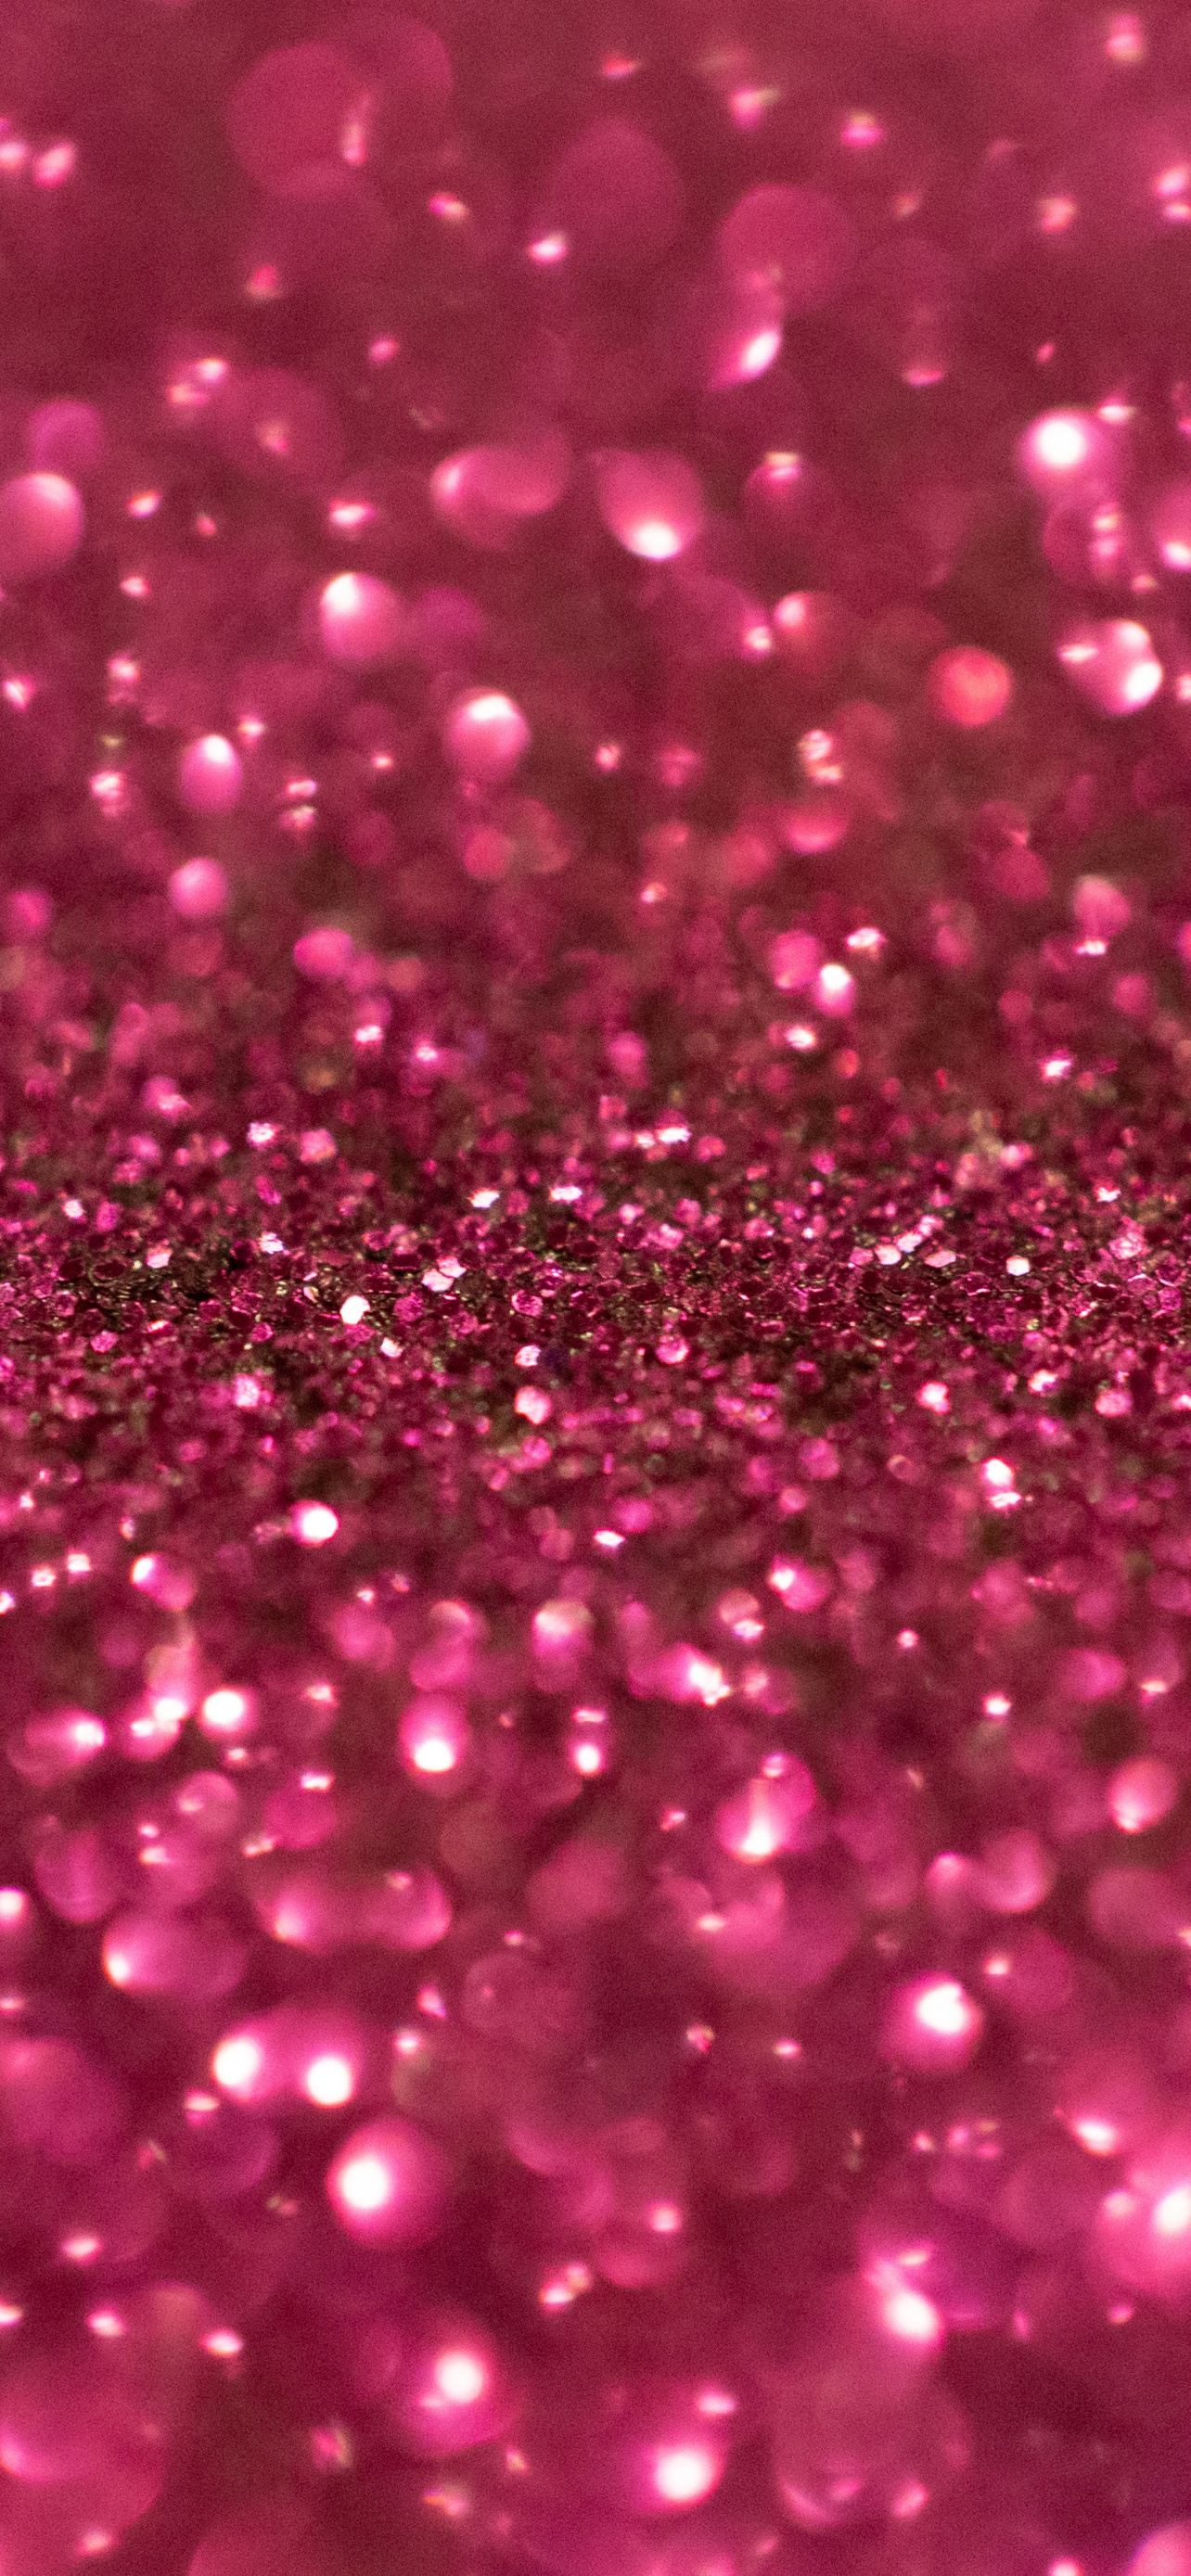 Purple Glitter Wallpaper for iPhone Free PNG ImageIllustoon